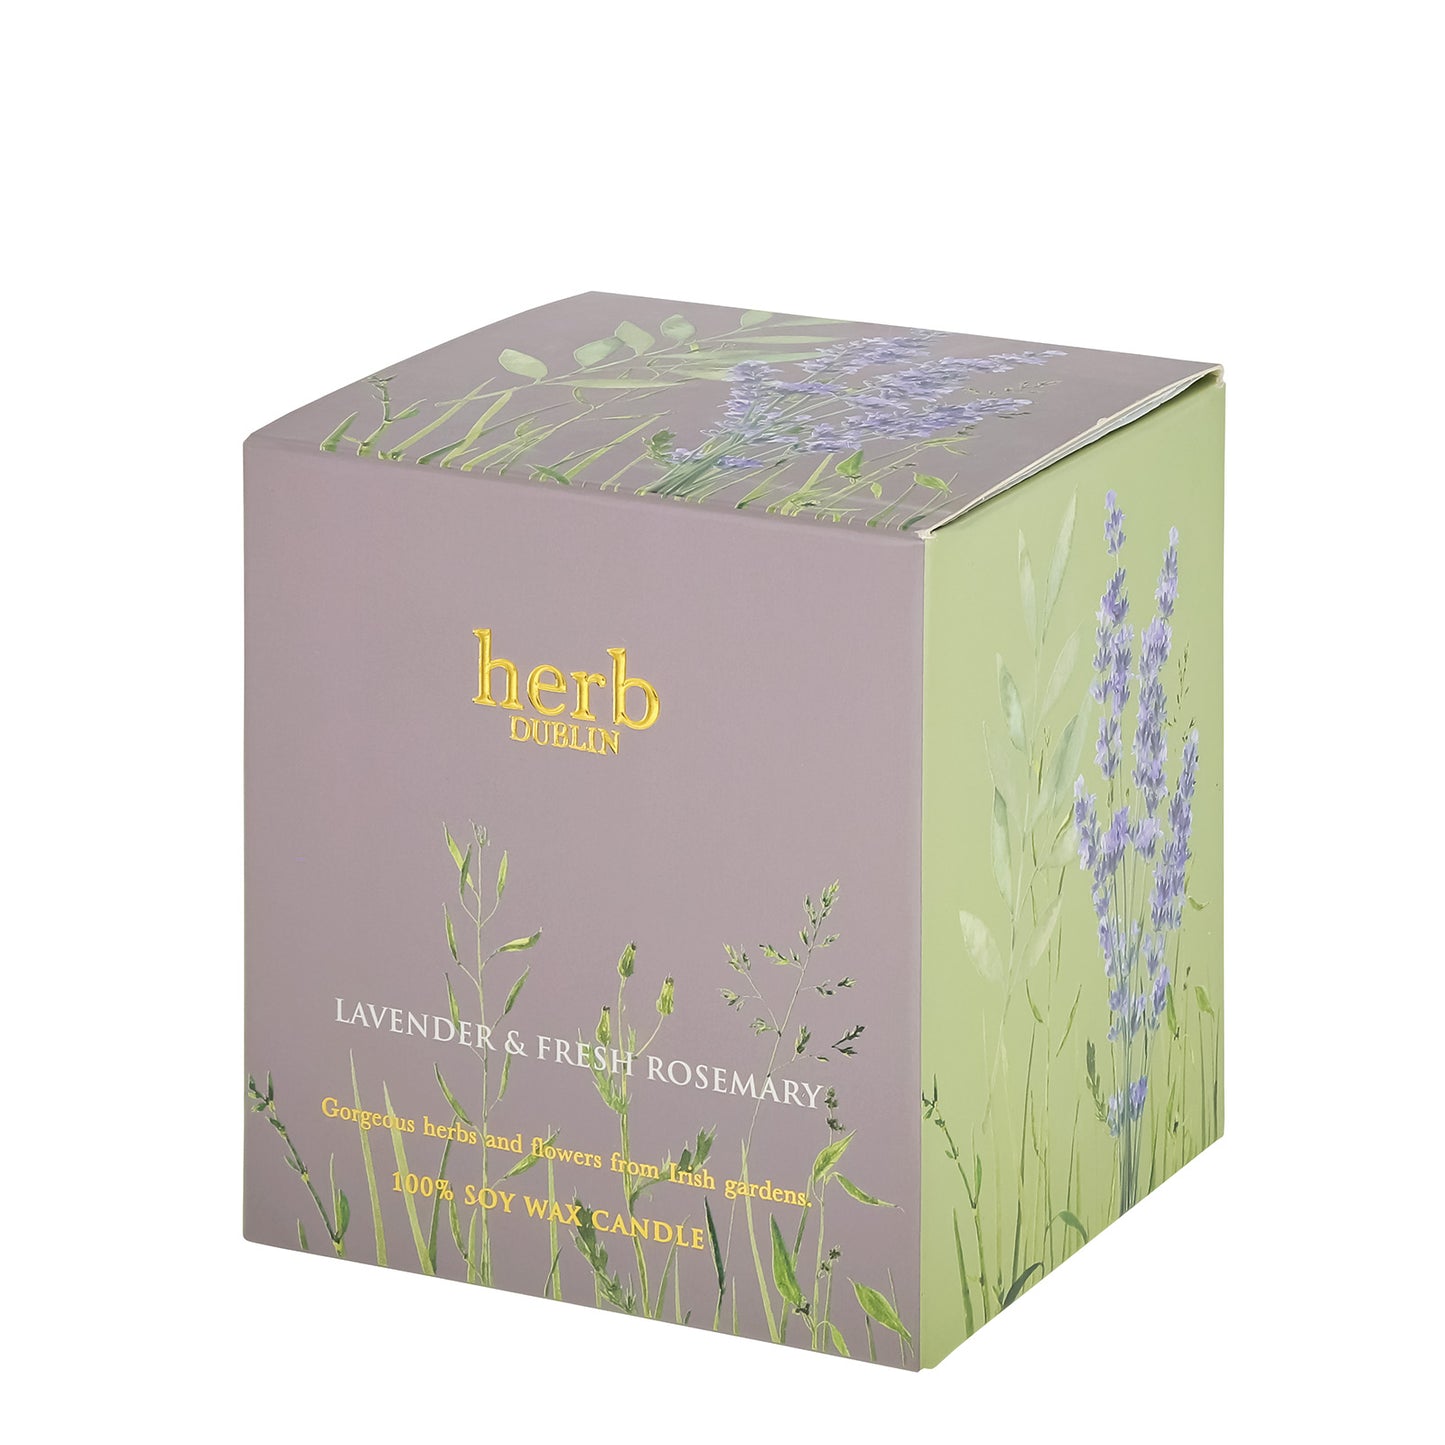 Herb Dublin Lavender & Rosemary Candle